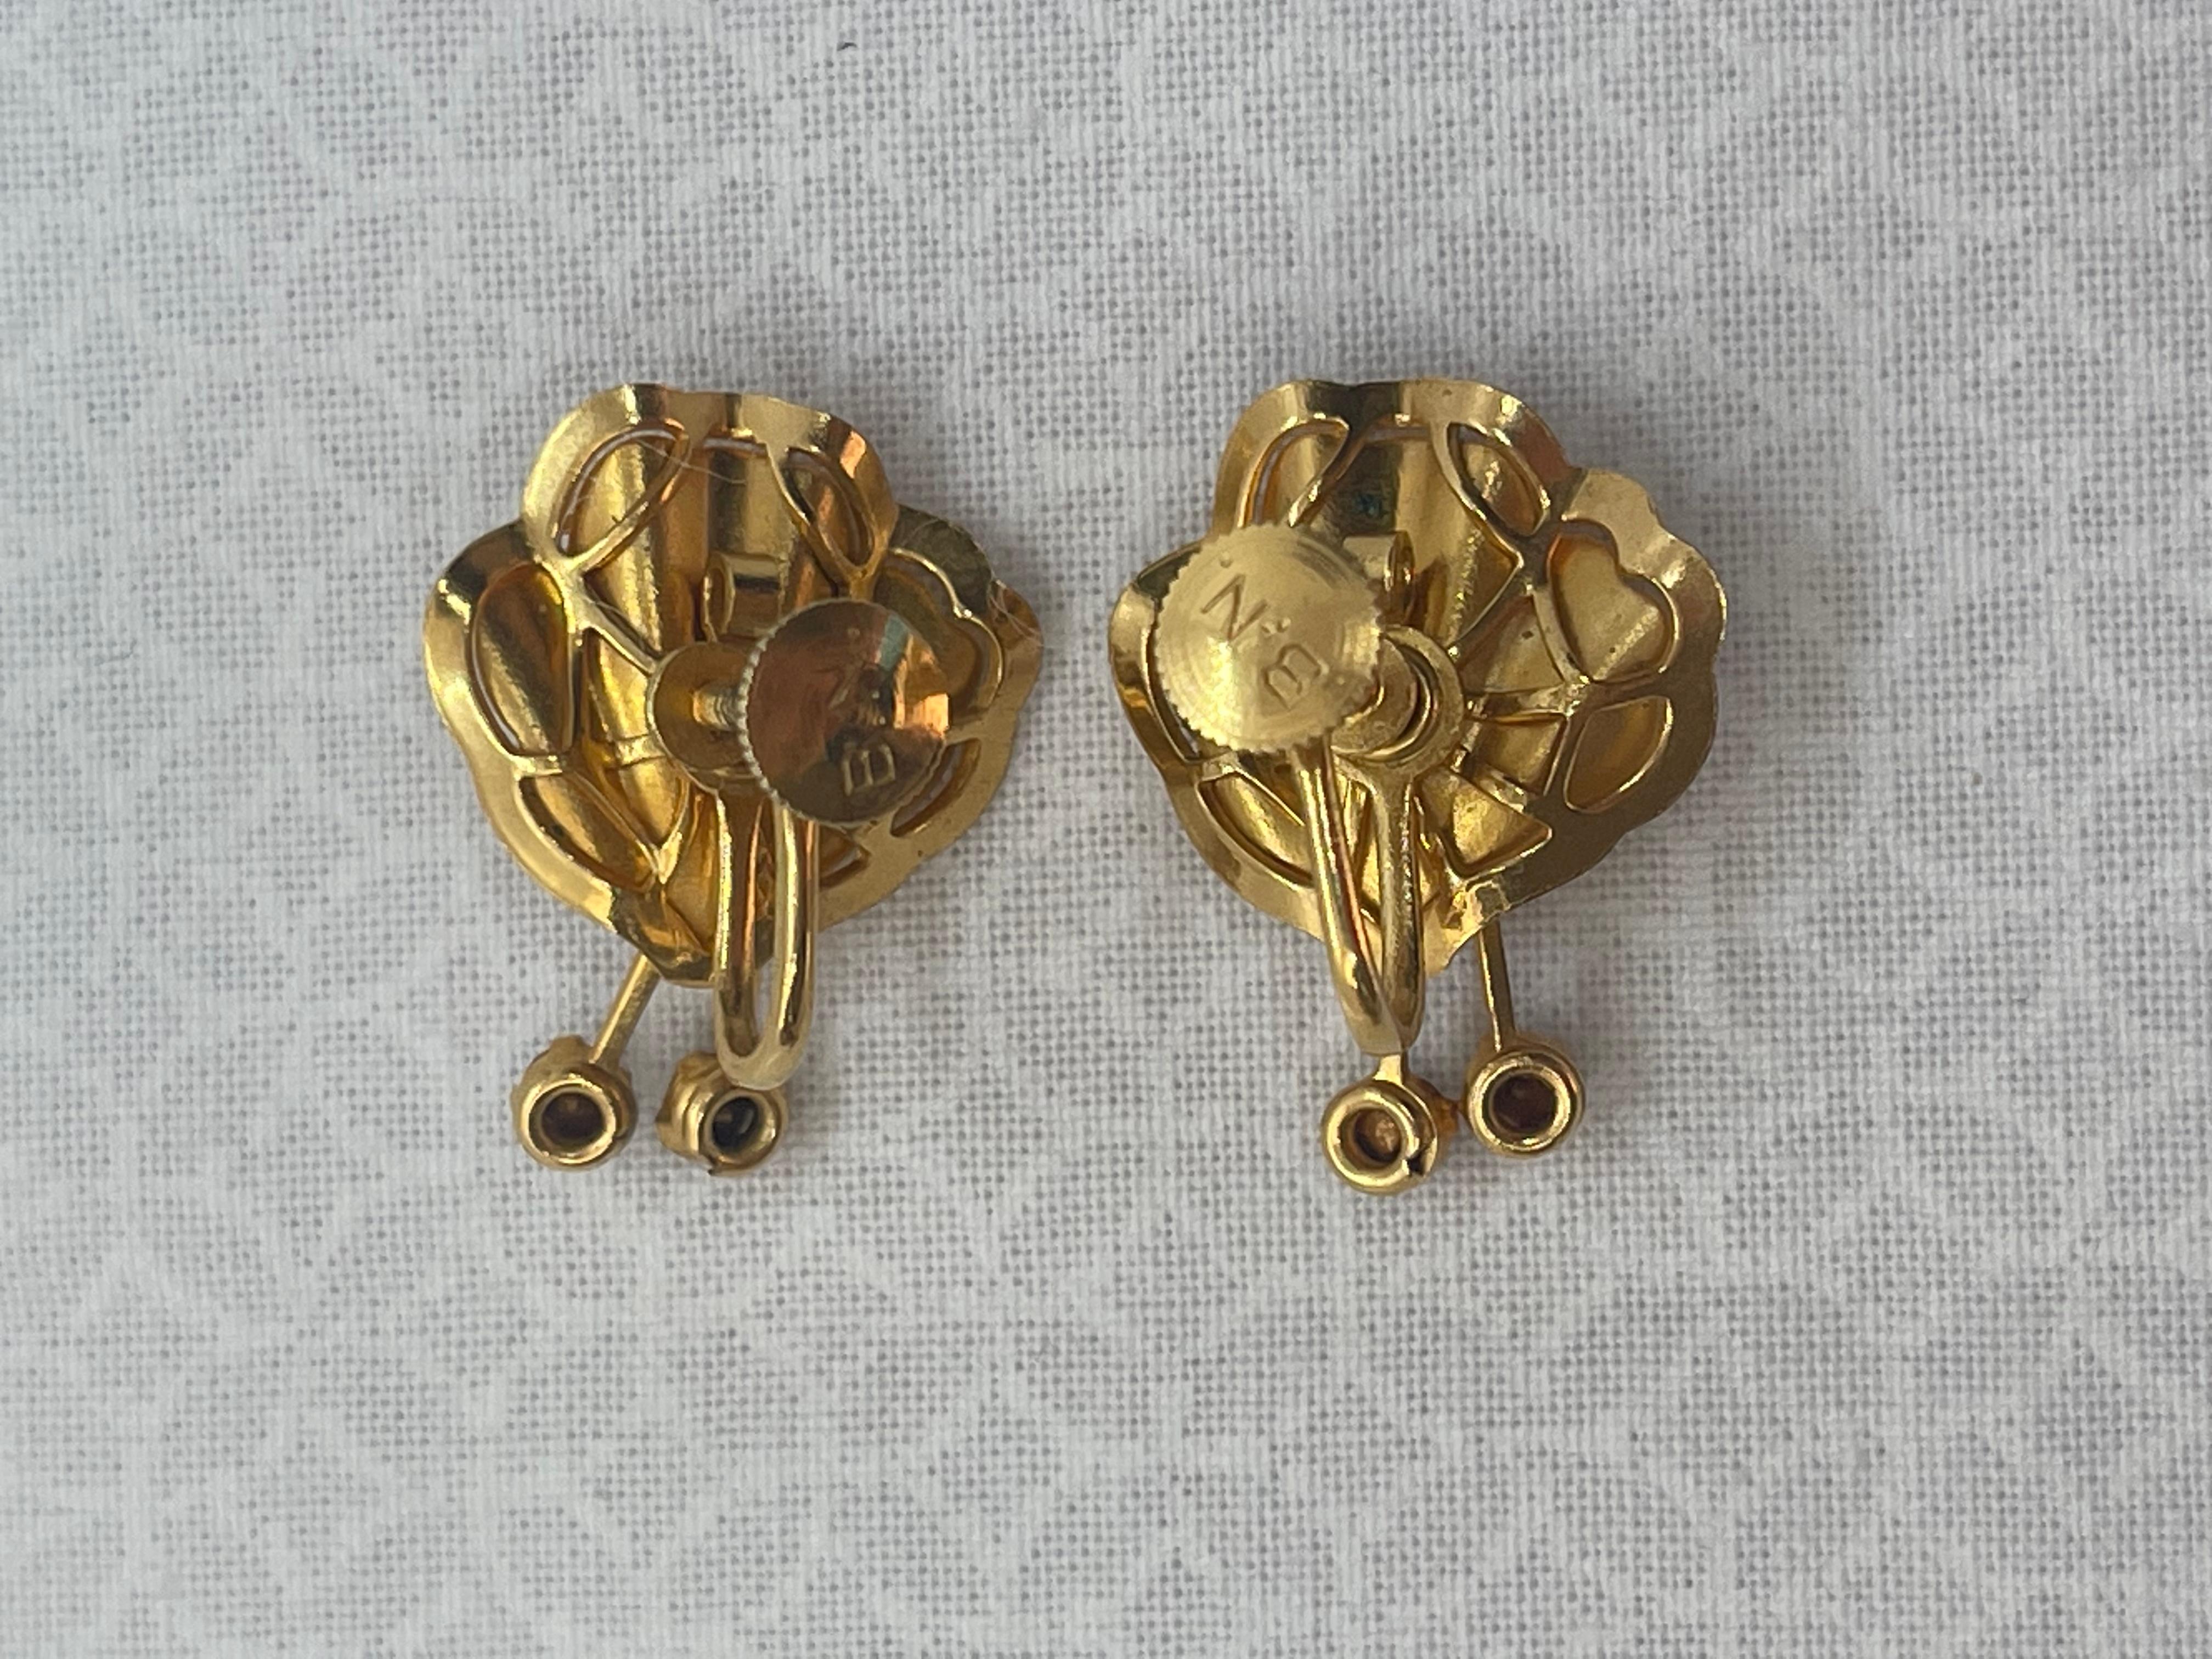 Modernist Bugbee & Niles Matching Earrings and Brooch Set Circa. 1955s - 1959 For Sale